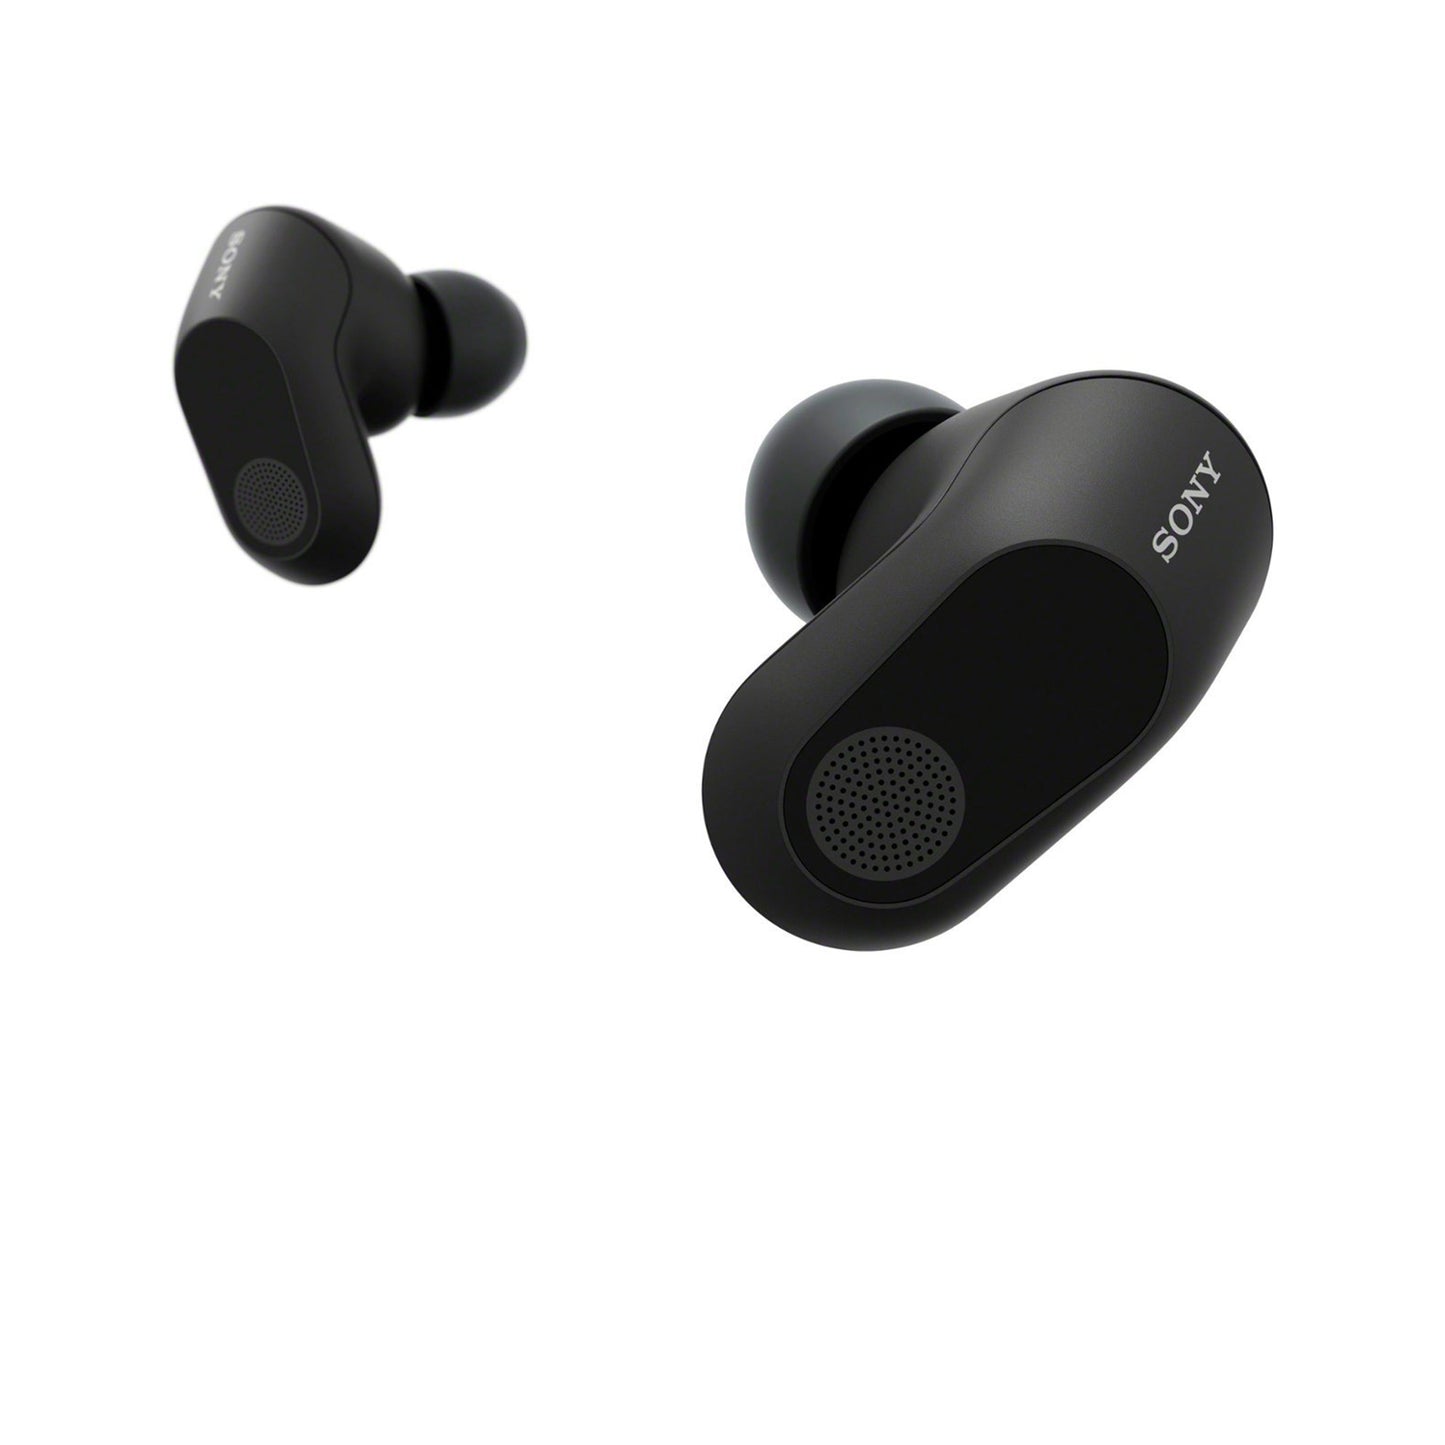 Sony - INZONE Buds Truly Wireless Noise Canceling Gaming Earbuds for PC and PS5 - Black